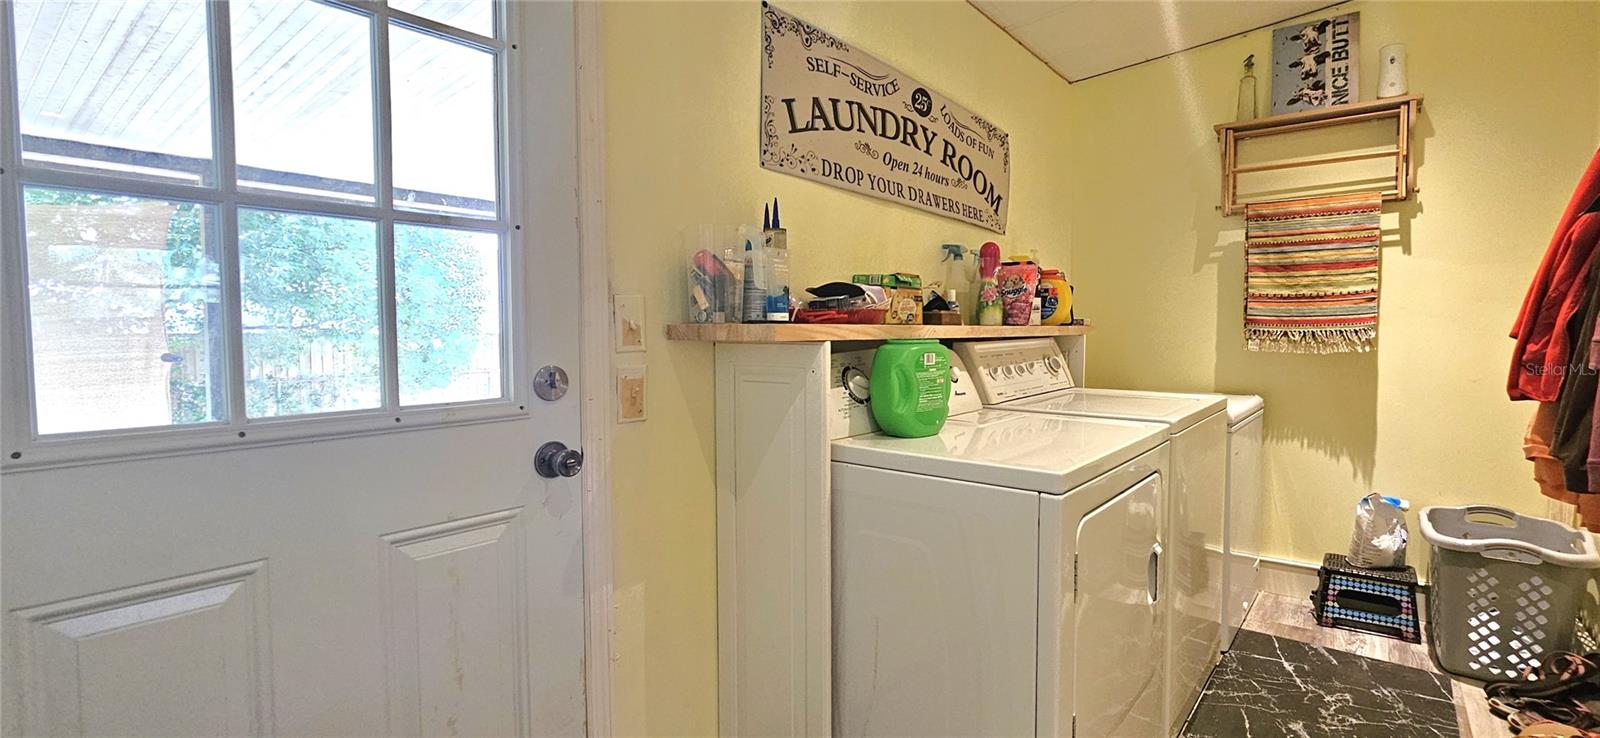 Inside laundry room includes side by side washer & dryer